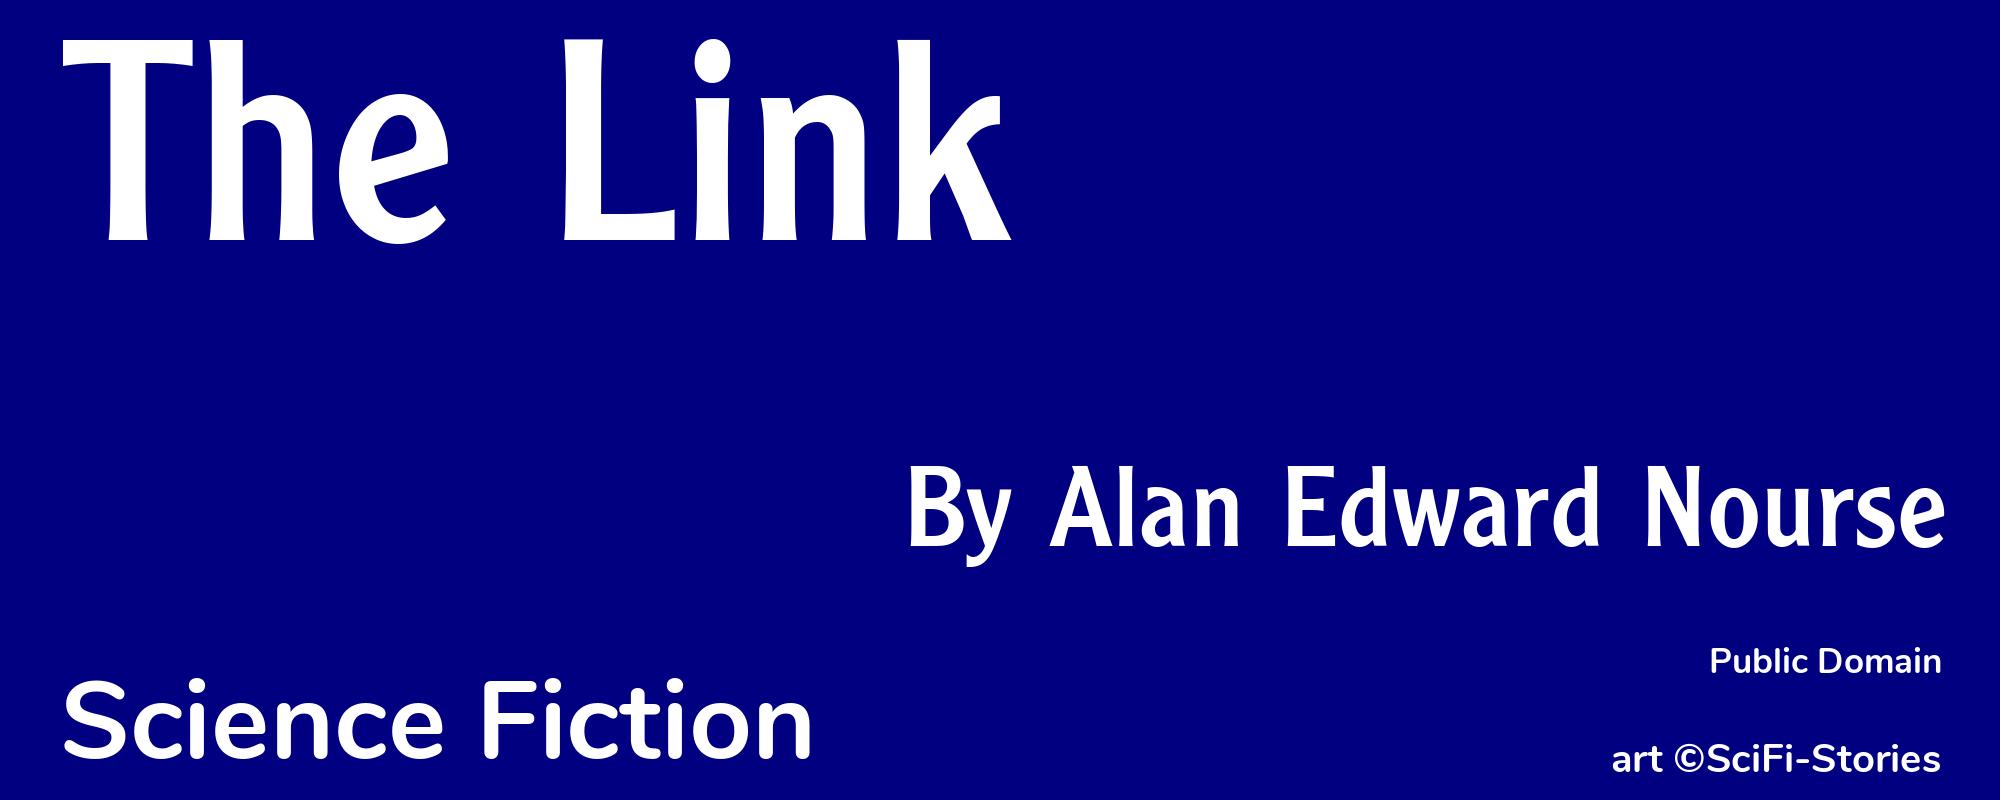 The Link - Cover